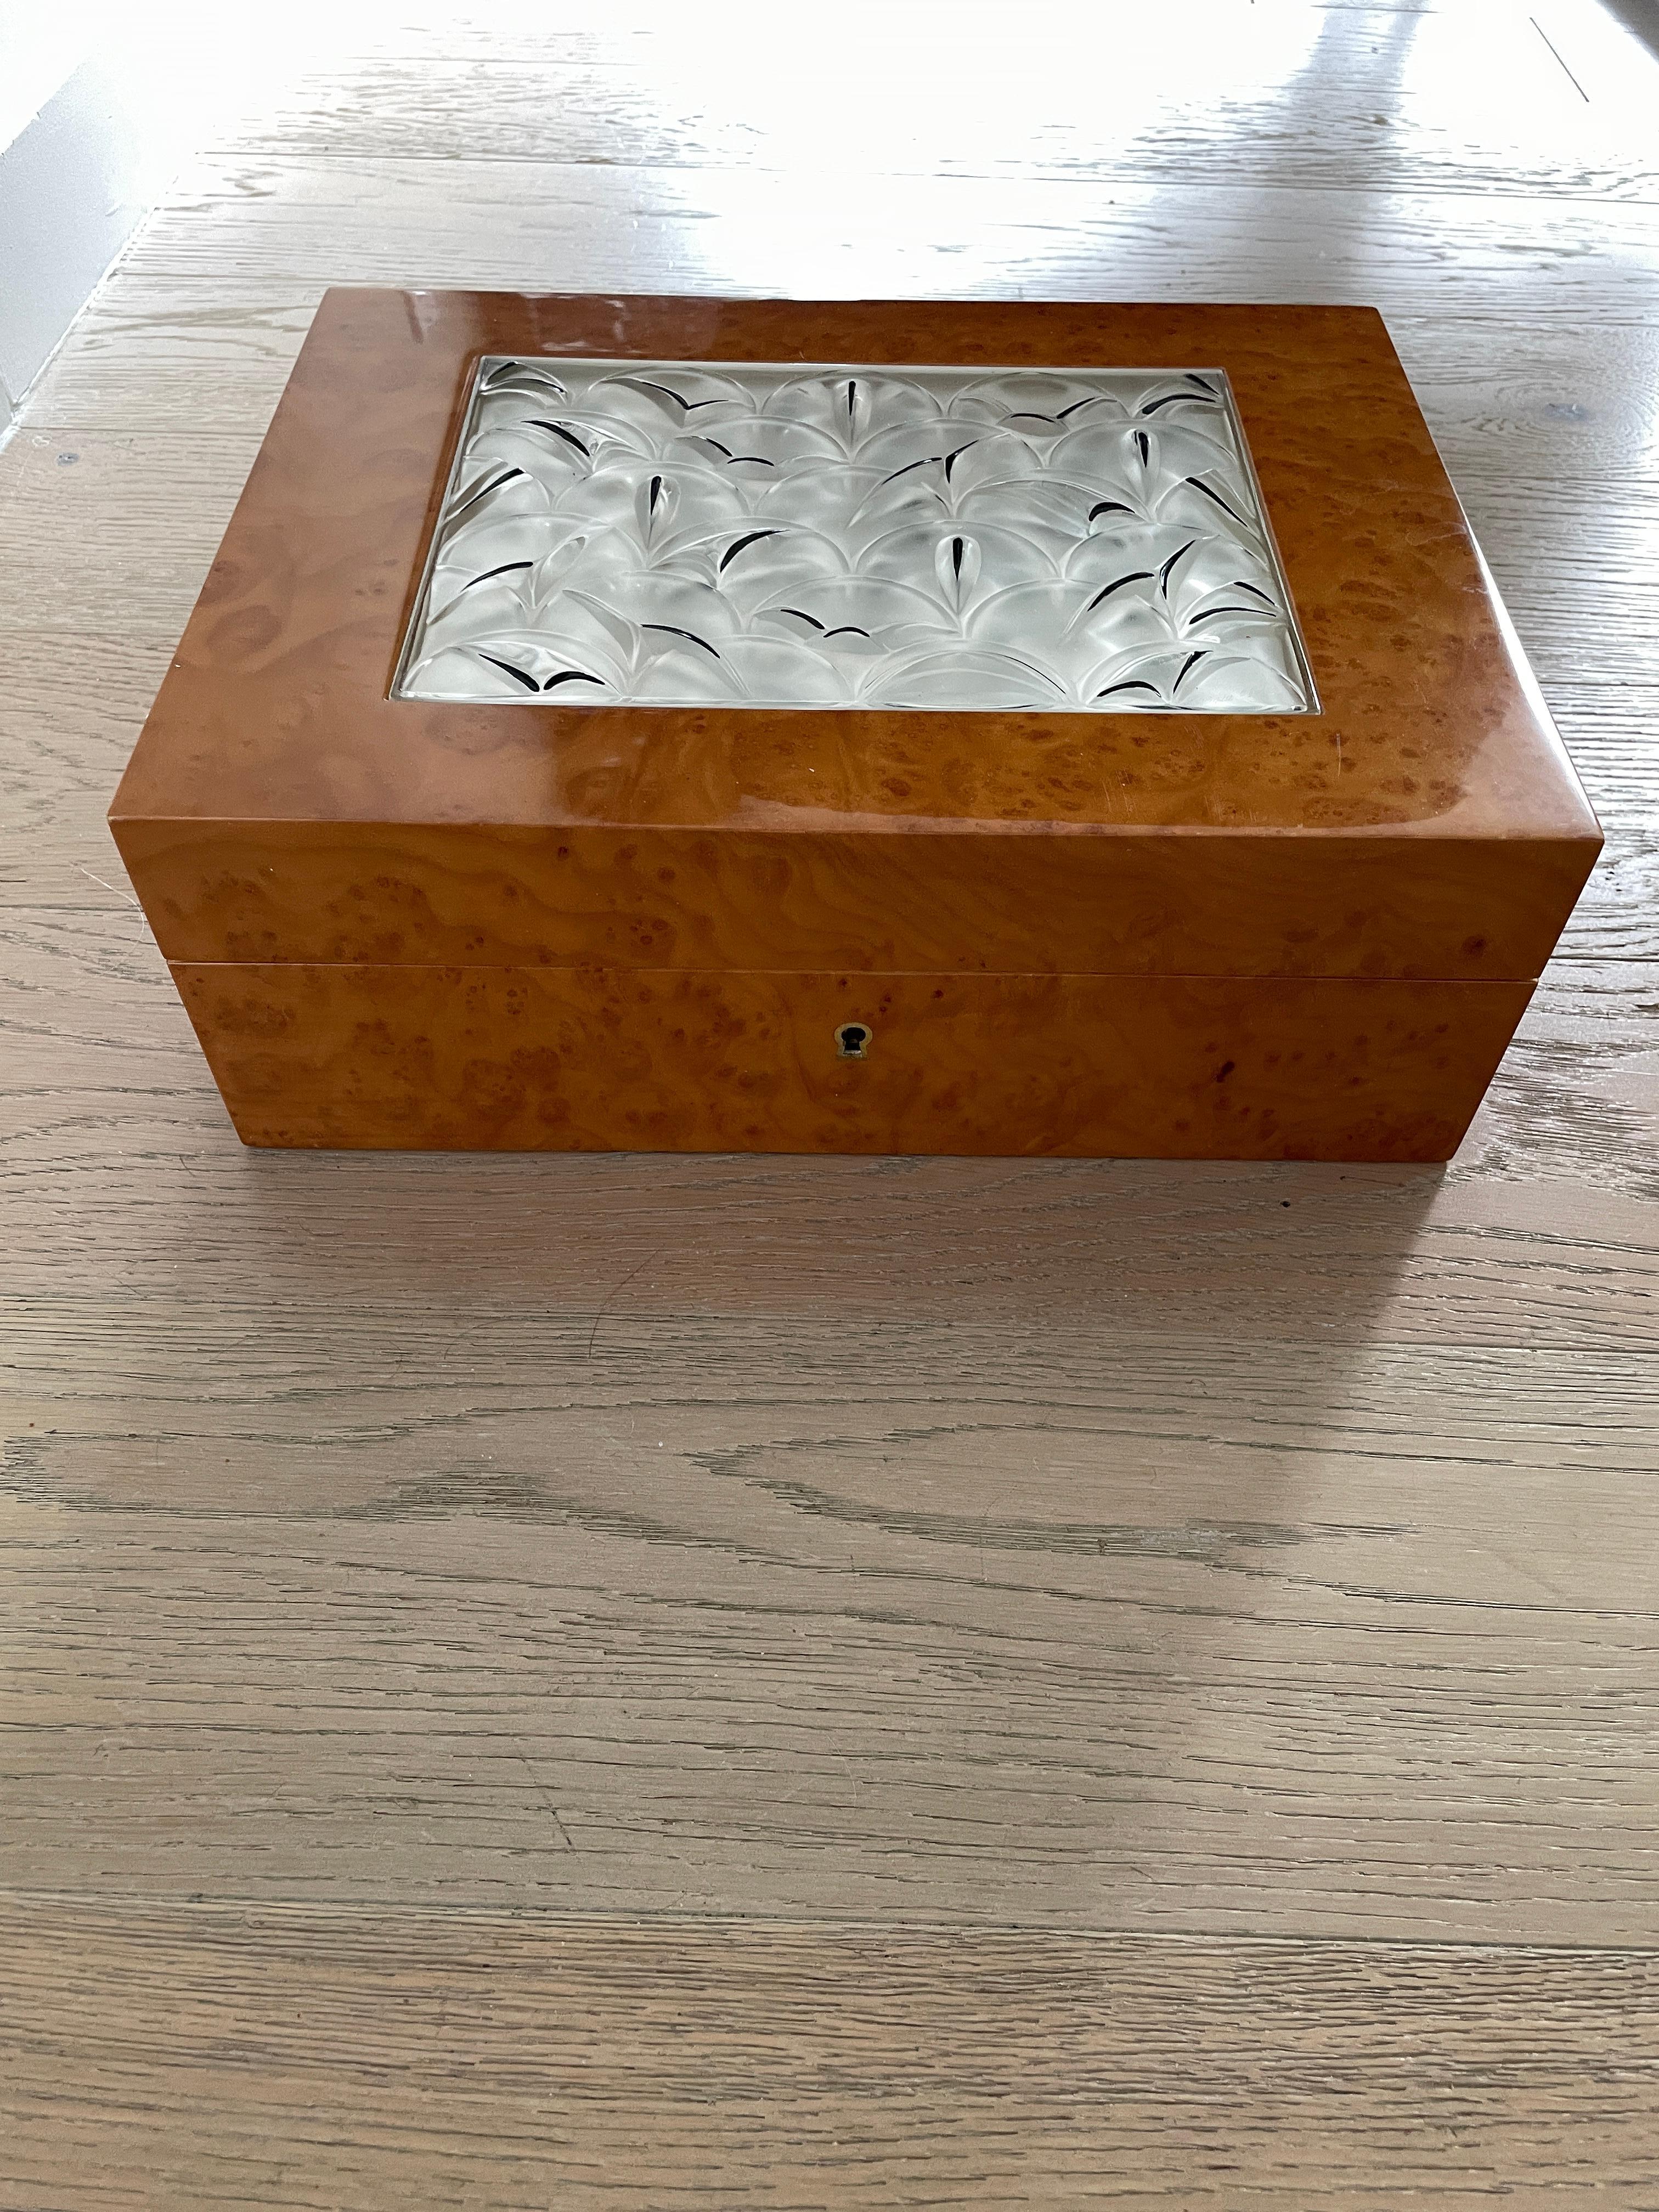 PLEASE NOT THE HARDWARE HAS PULLED OUT FROM THE BASE. MOST LIKLY FIXABLE
LALIQUE CRYSTAL VINTAGE MADRONA CIGAR HUMIDOR BOX
1994 - MARIE-CLAUDE LALIQUE - LOUPE MADRONA 
NEVER BEEN USED
MISSING KEY - GOLD PLATED HINGES
ENGRAVED INSIDE ON GOLD PLATED